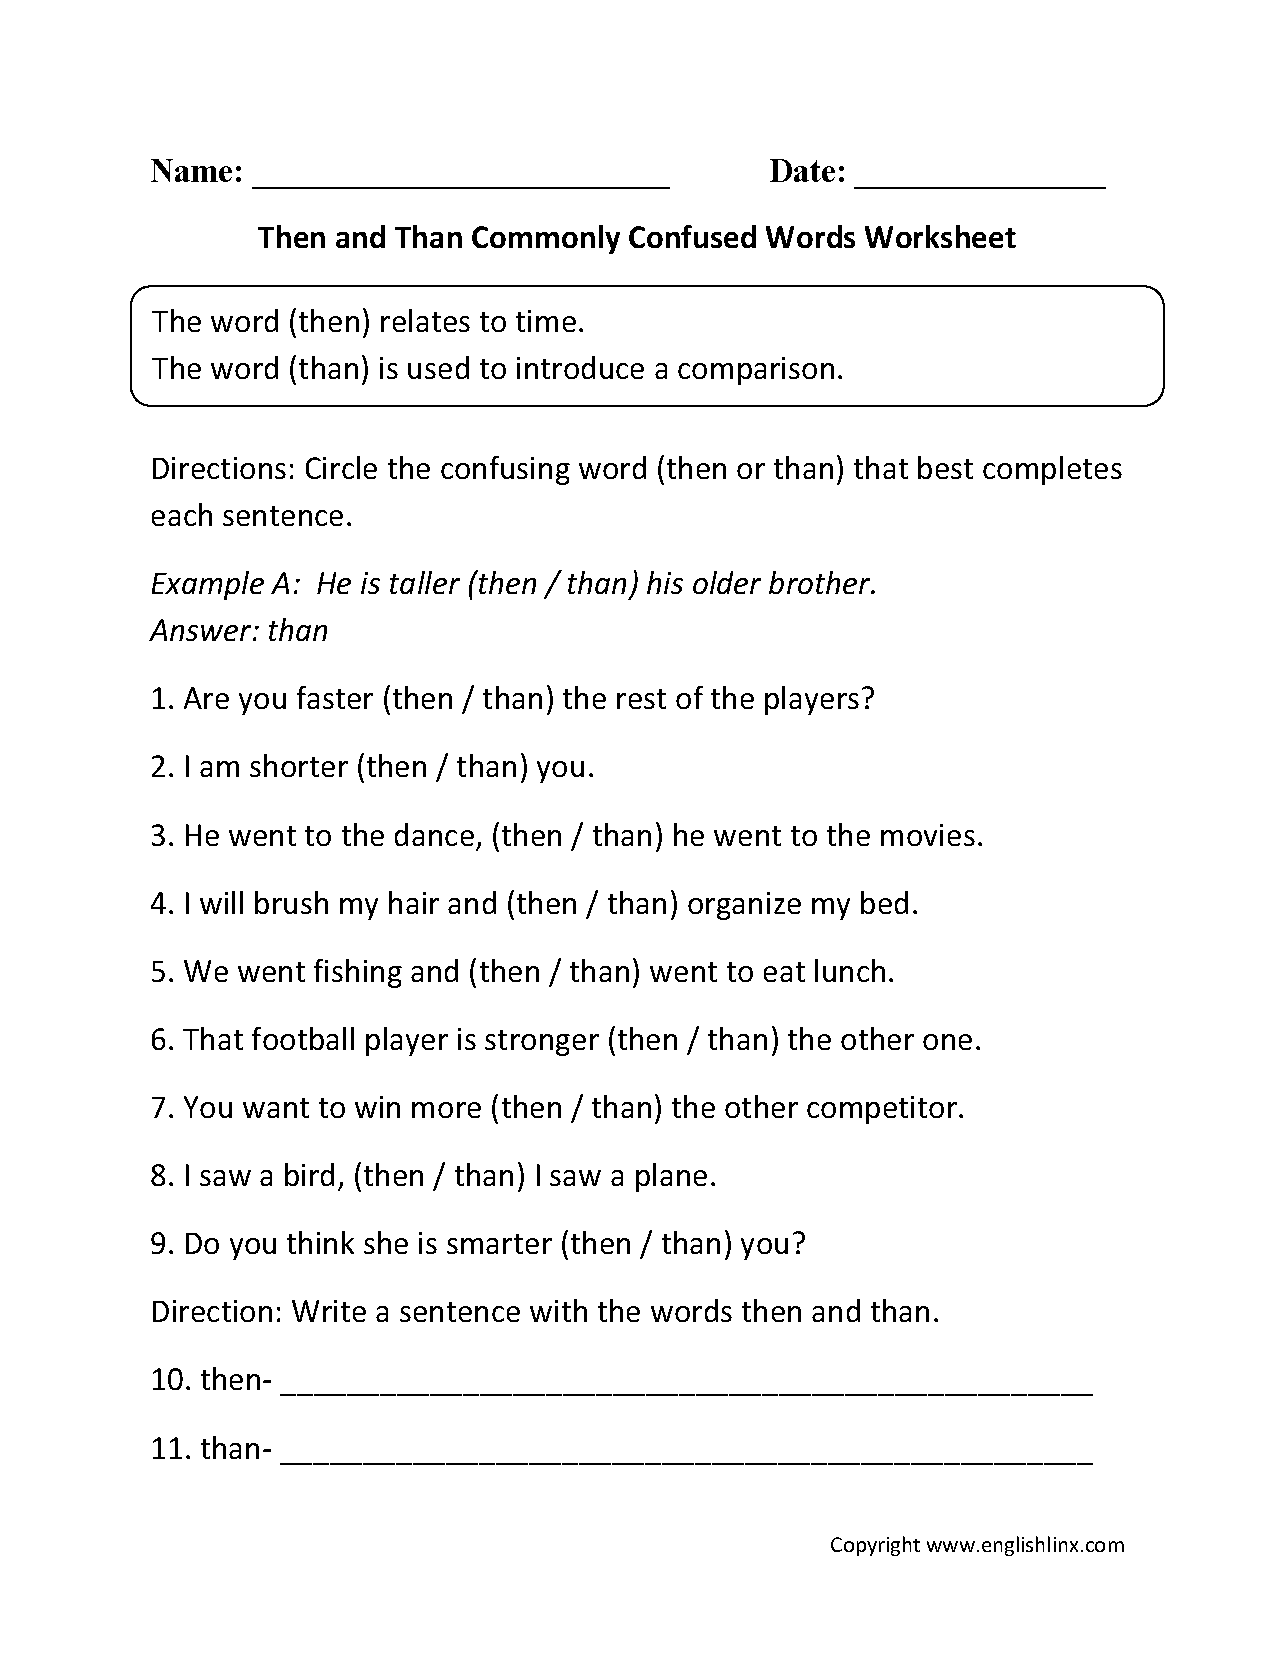 Then vs Than Commonly Confused Words Worksheets